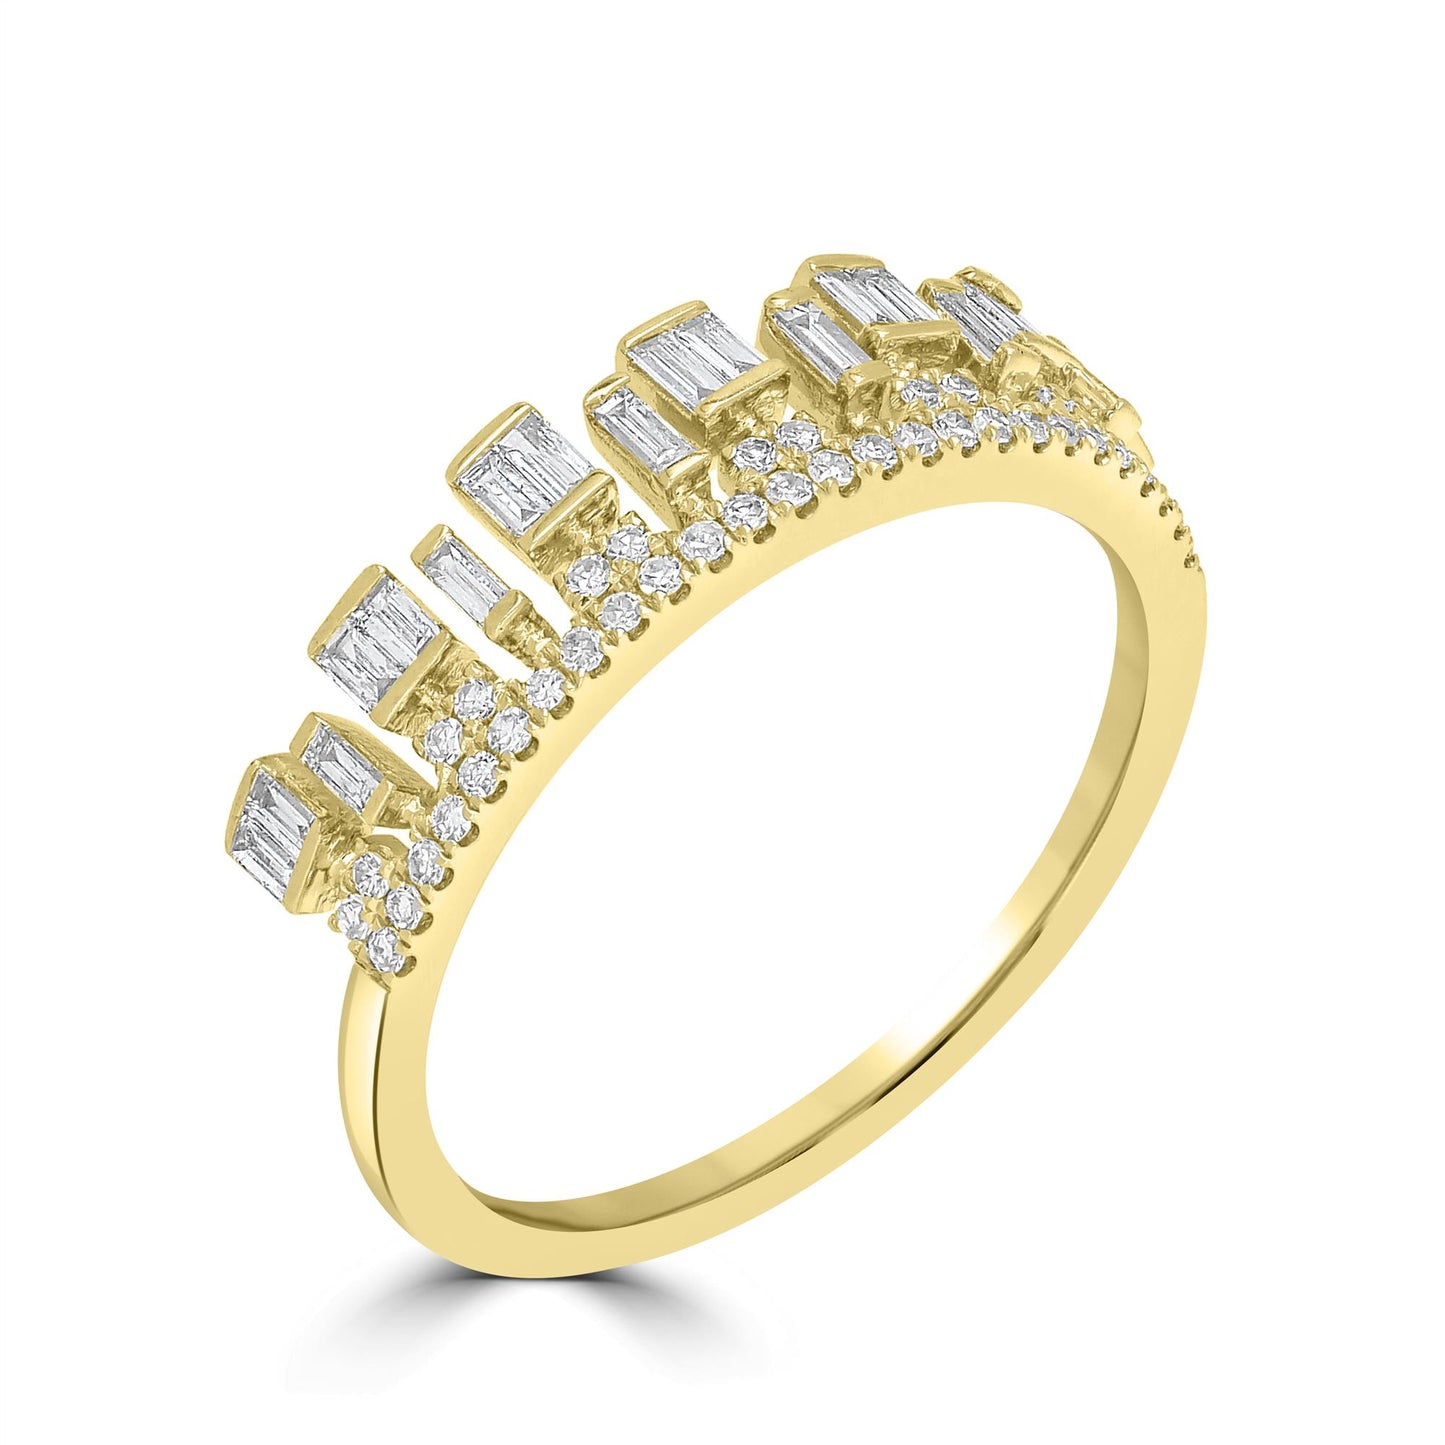 Staggered 14K Gold & Diamond Crown Ring